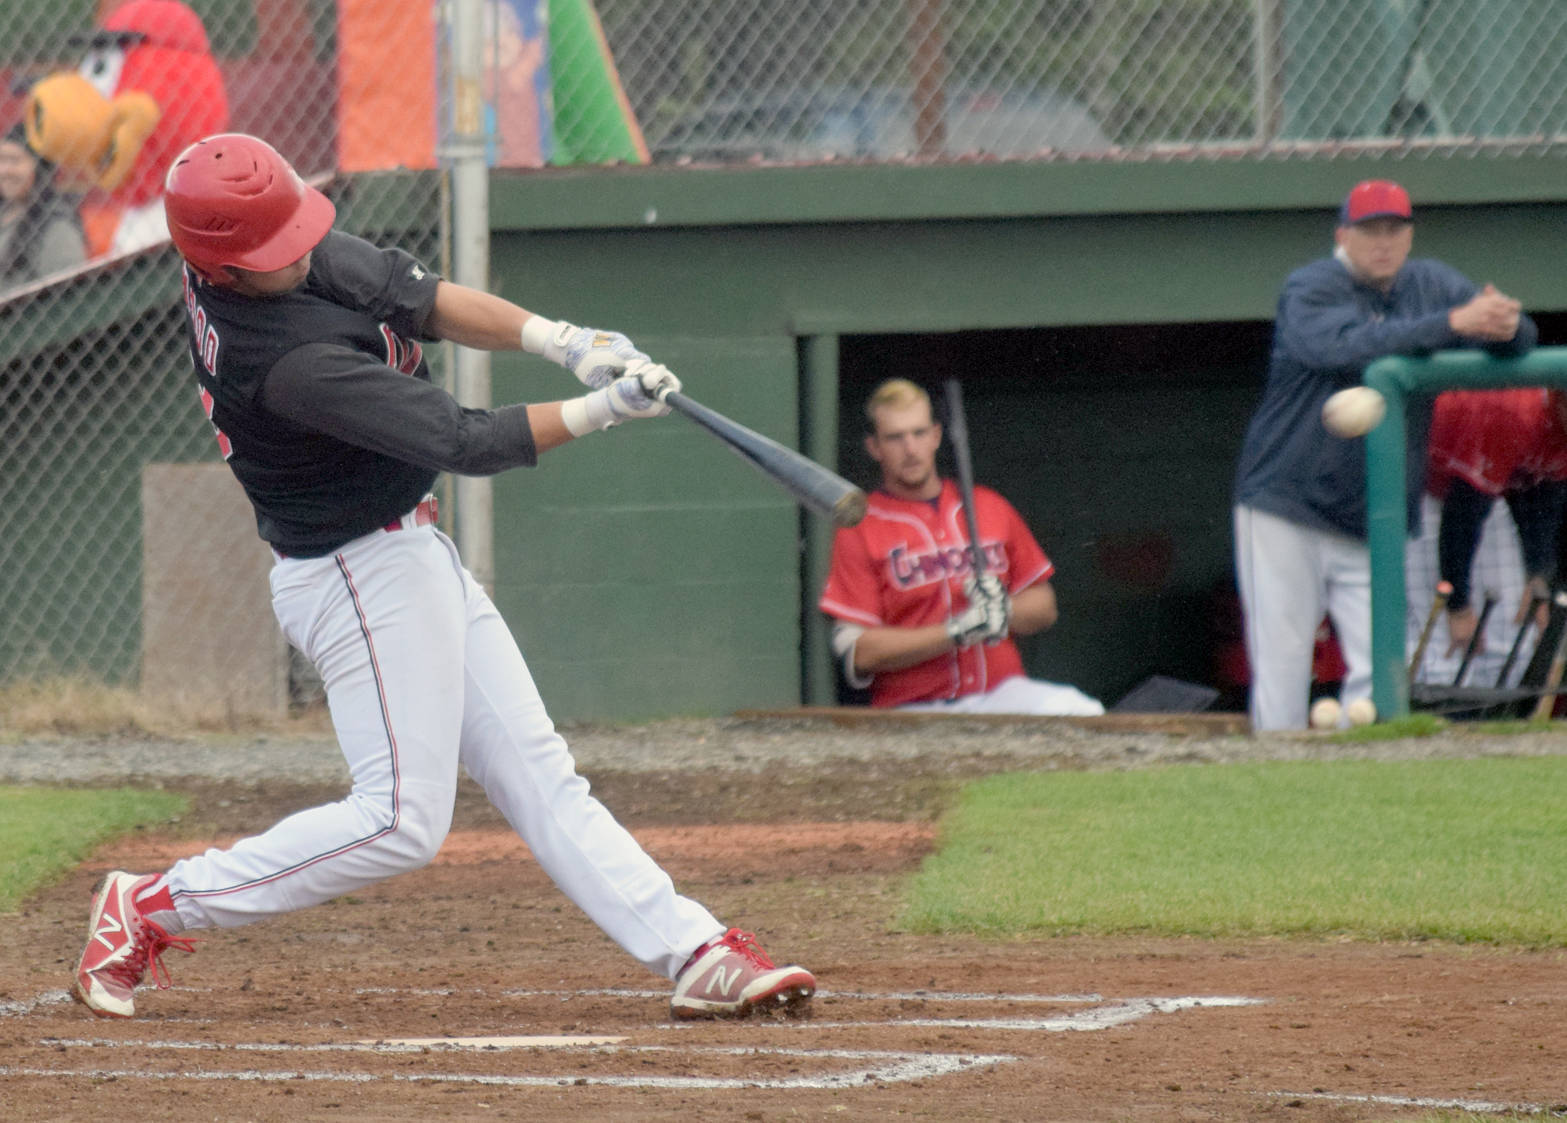 Oilers’ Grant Woods hits a double against the Chugiak-Eagle River Chinooks in the second inning Thursday, June 21, 2018, at Coral Seymour Memorial Park in Kenai. (Photo by Jeff Helminiak/Peninsula Clarion)